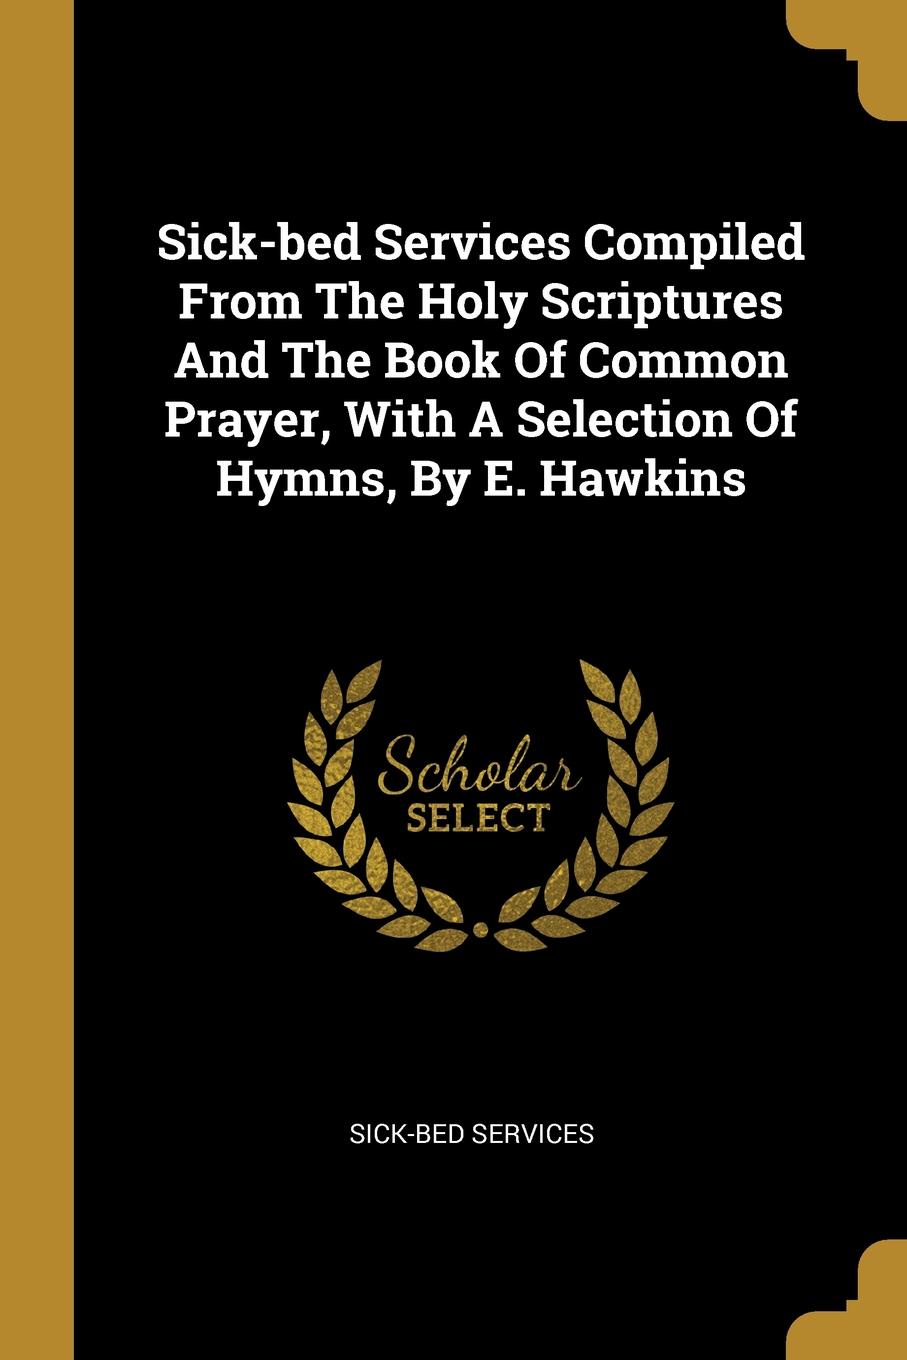 Sick-bed Services Compiled From The Holy Scriptures And The Book Of Common Prayer, With A Selection Of Hymns, By E. Hawkins